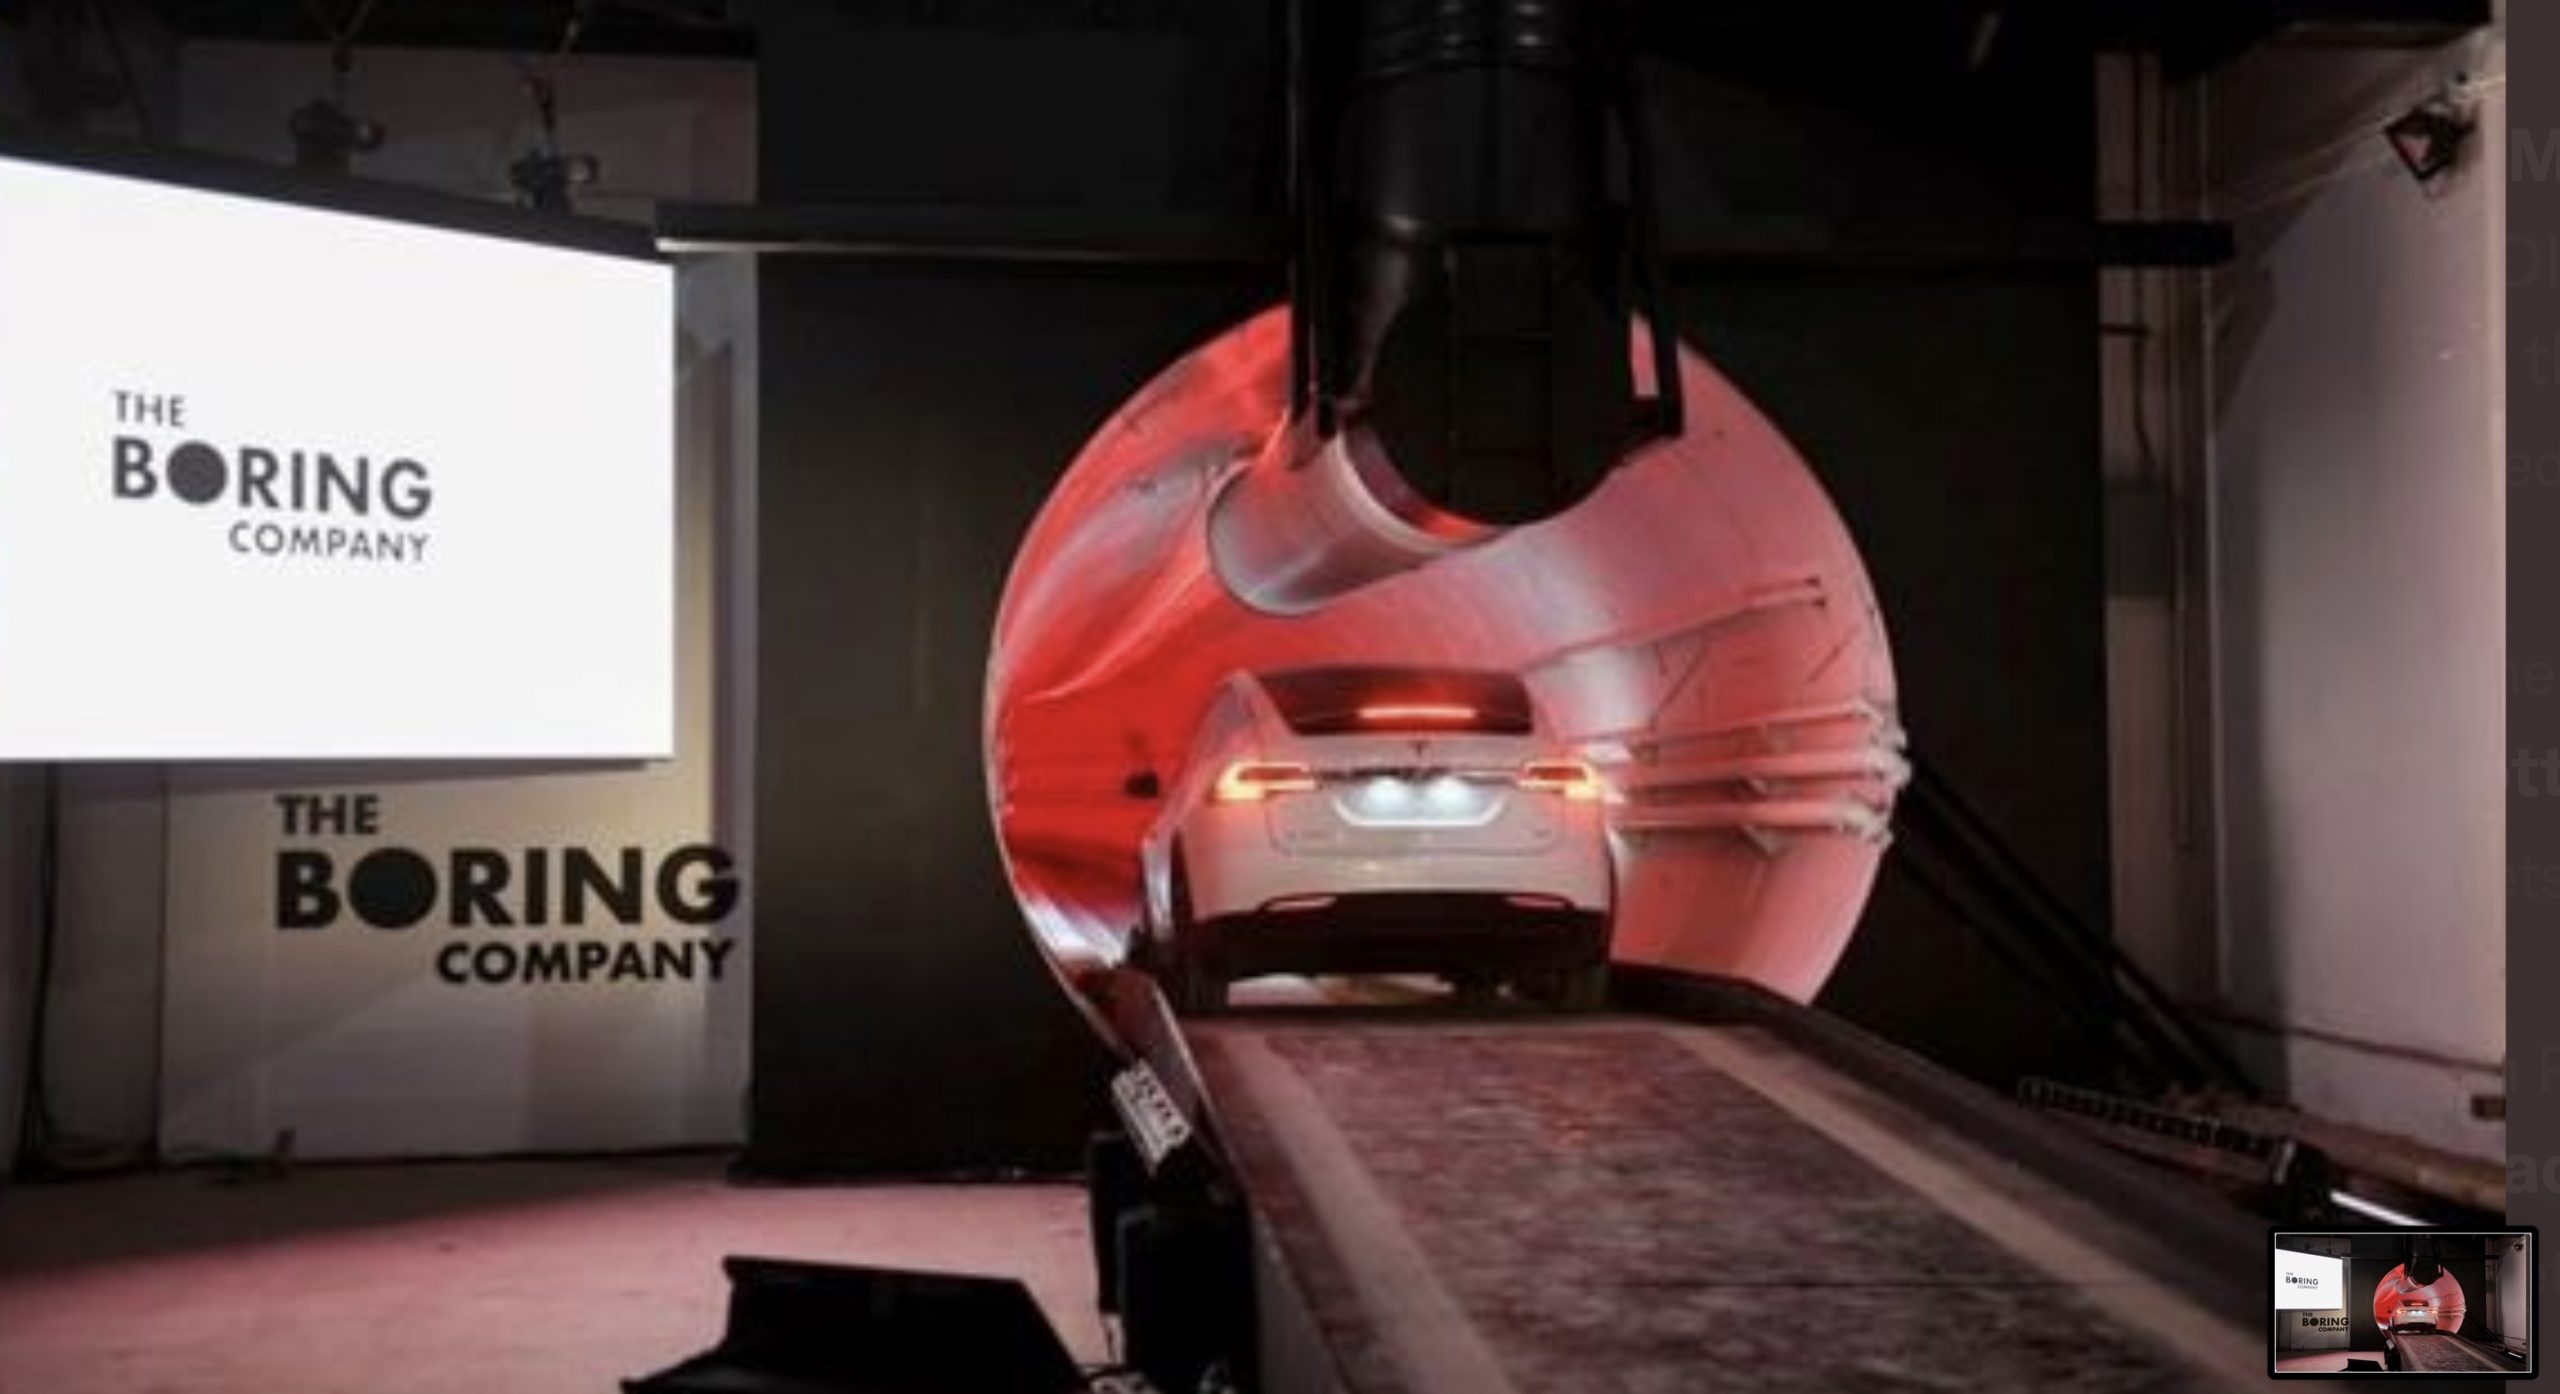 The Boring Company to Switch State of Incorporation